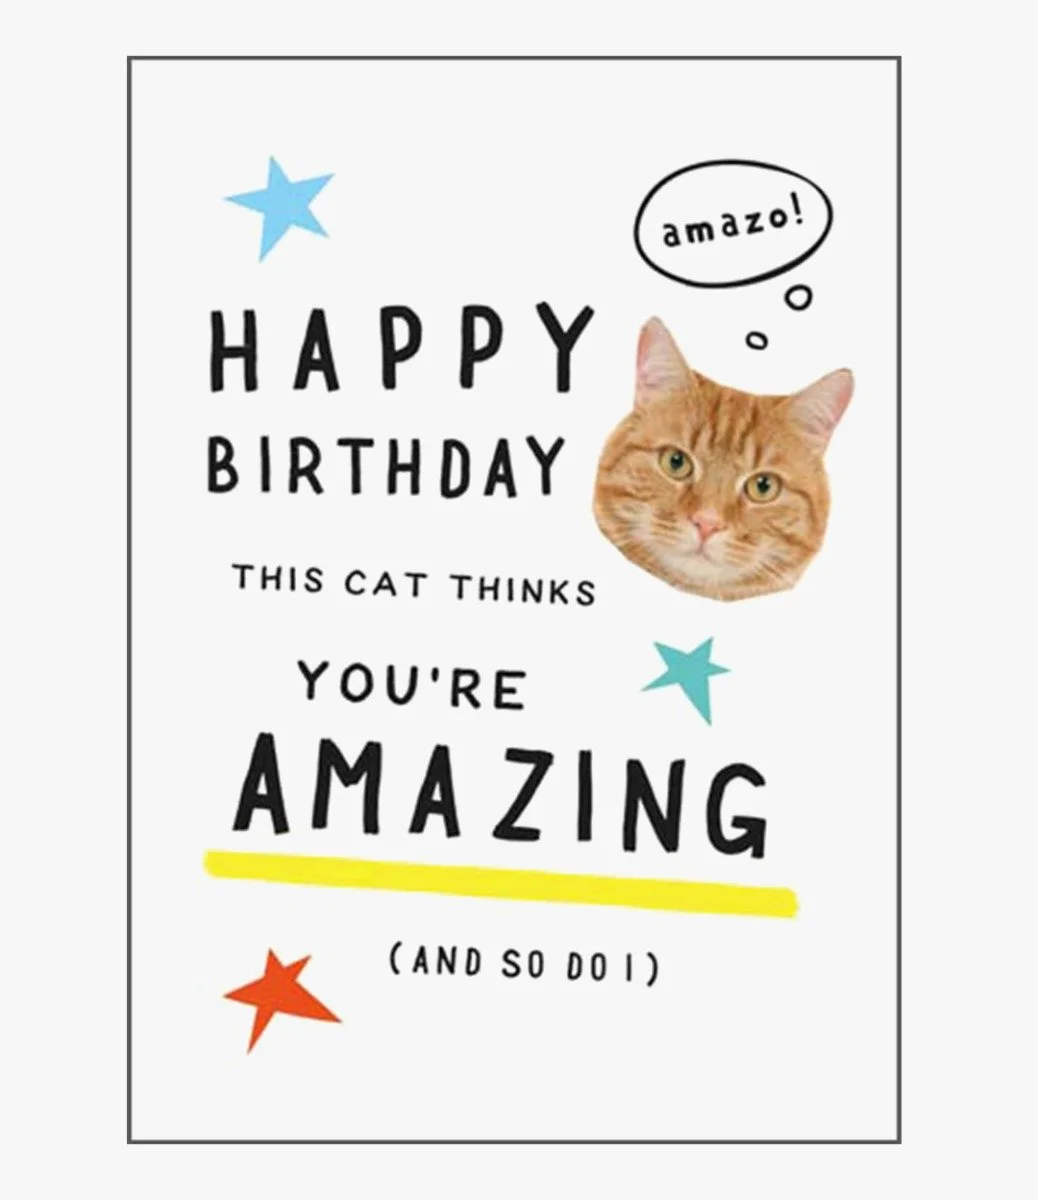 Cat Thinks You're Amazing Greeting Card by Horsefinger